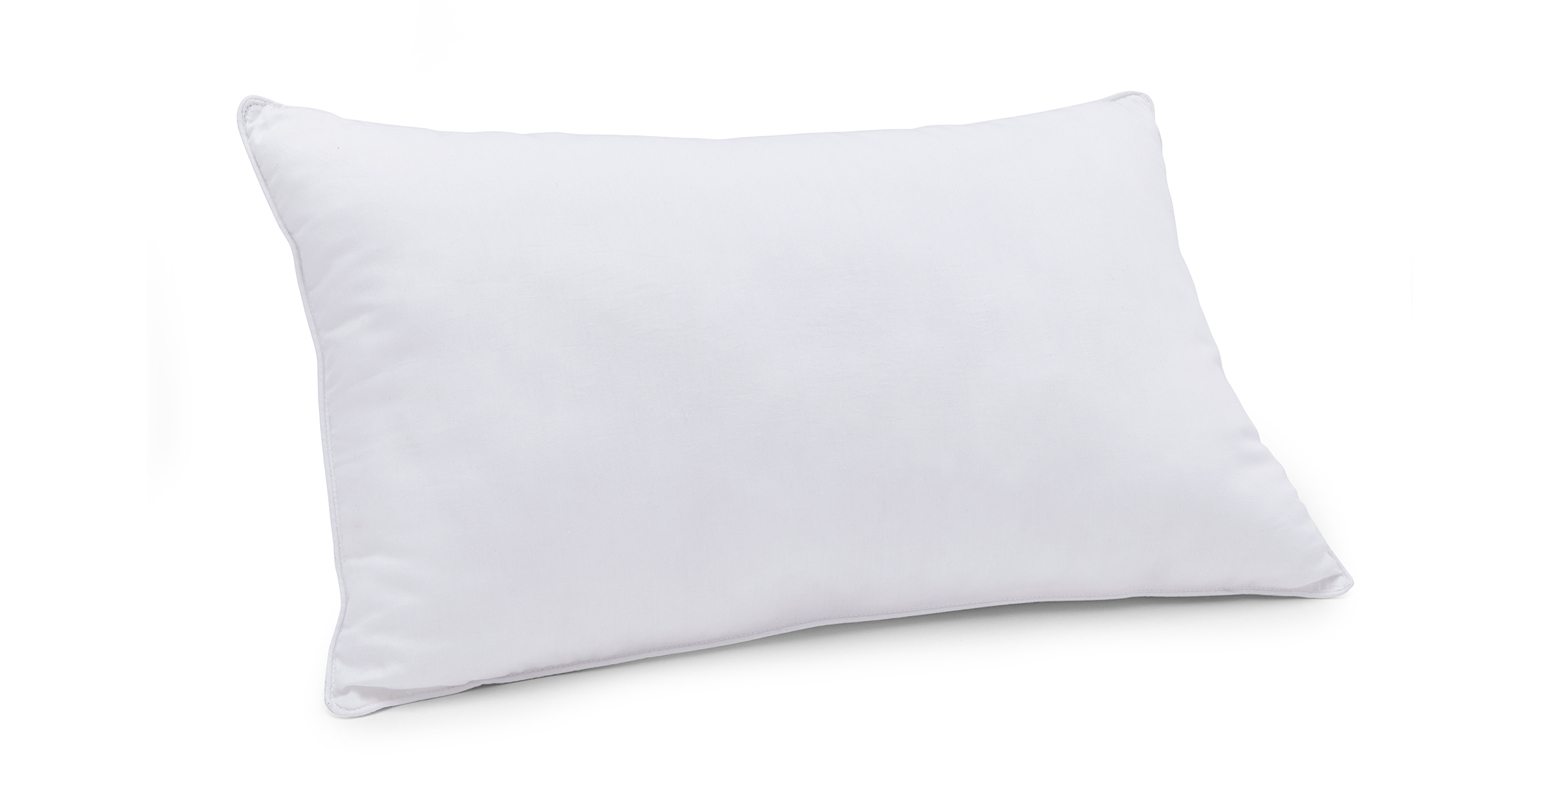 Temperature Regulating Baby Pillow One Size